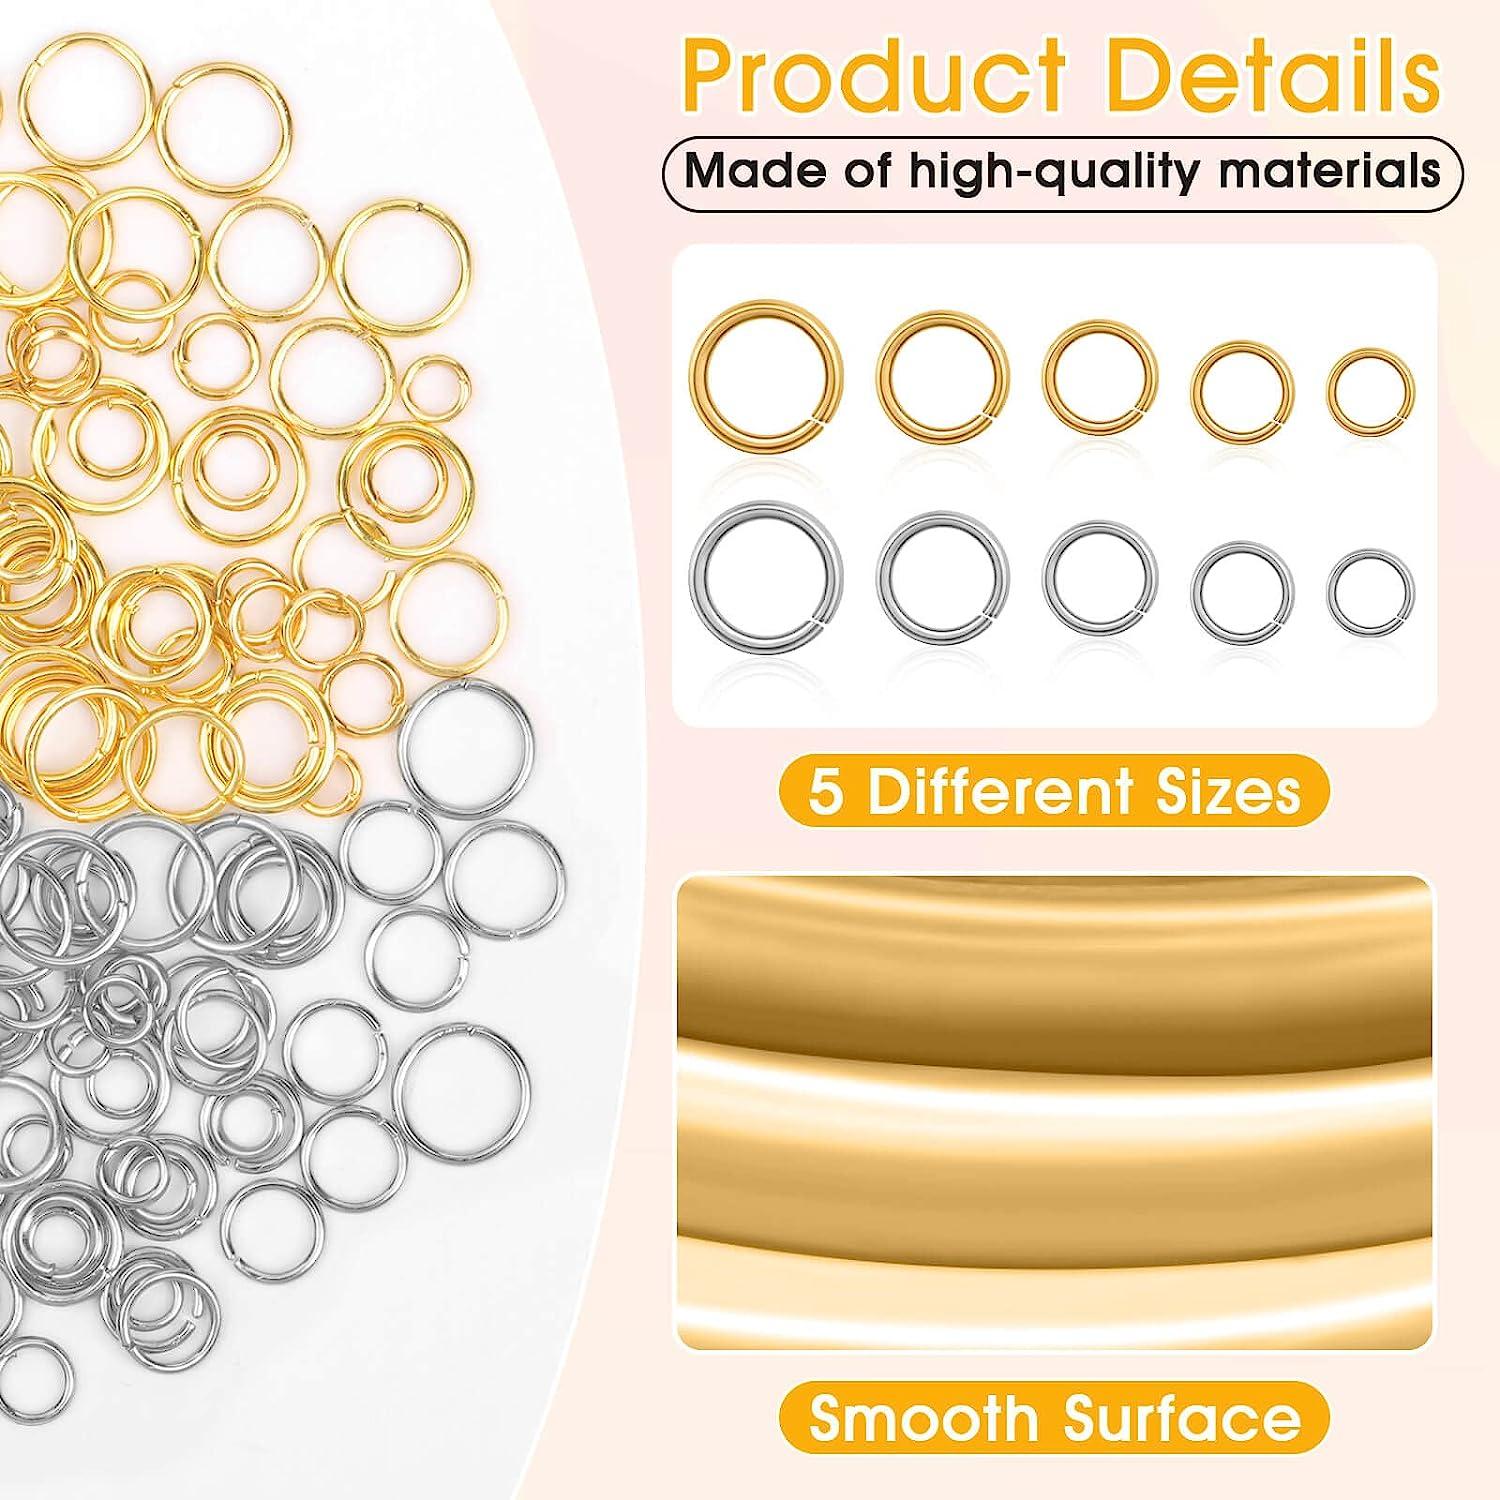  Jewelry Repair Kit - 4600 Pcs Silver and Gold Jump Rings for  Jewelry Making with Jump Ring Opener for Jewelry Making and Necklace Repair  (4/5/6/7/8 mm)